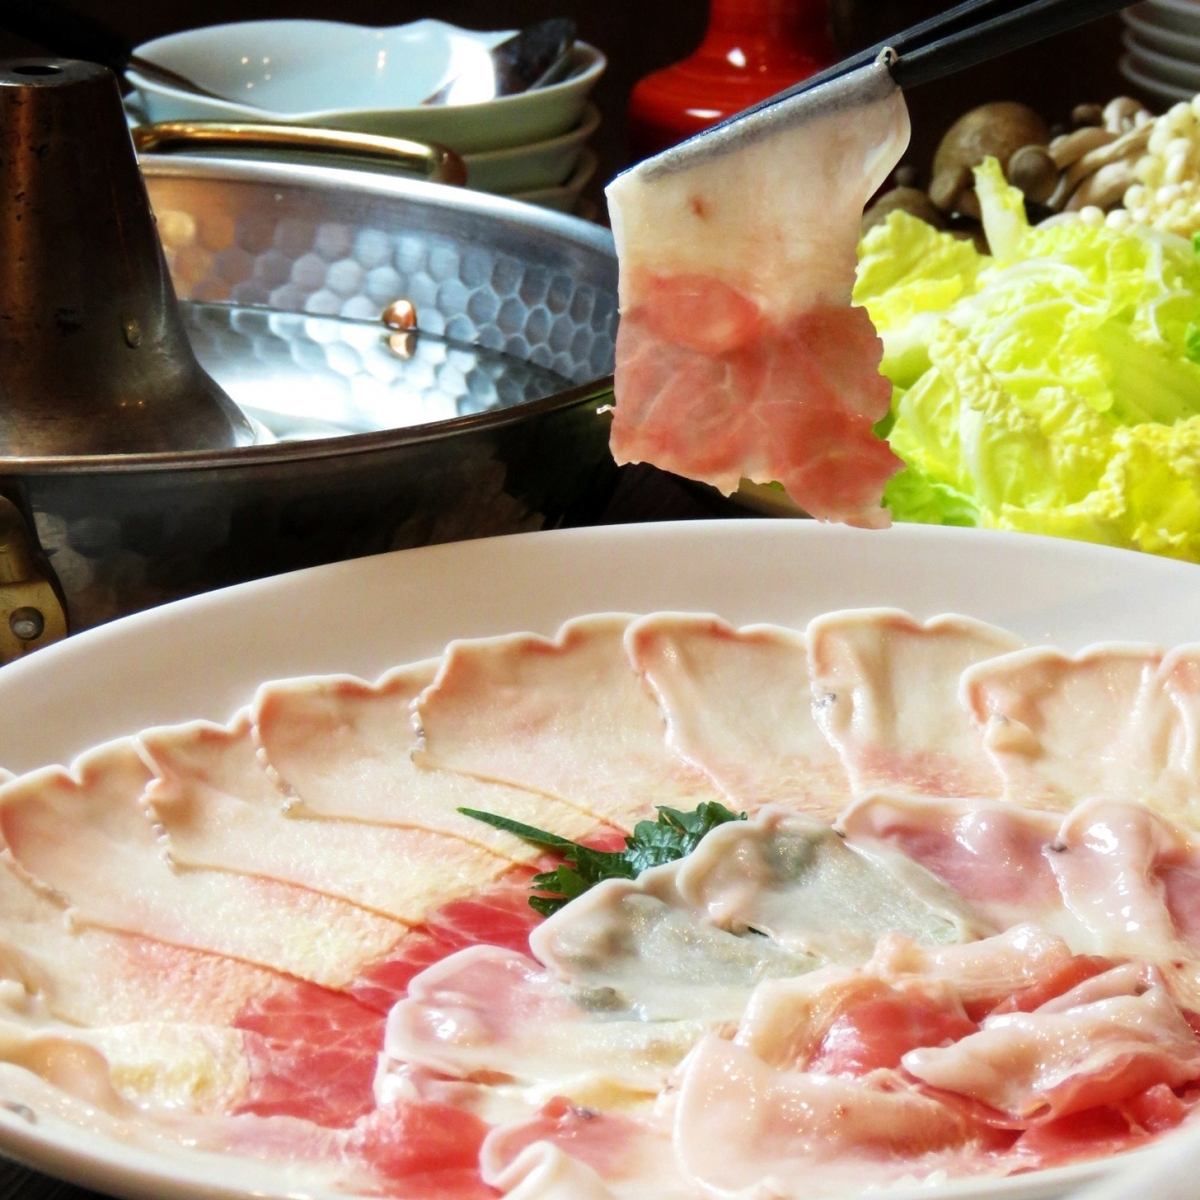 We offer a course meal packed with the delicious flavors of Kyushu and Nagasaki.